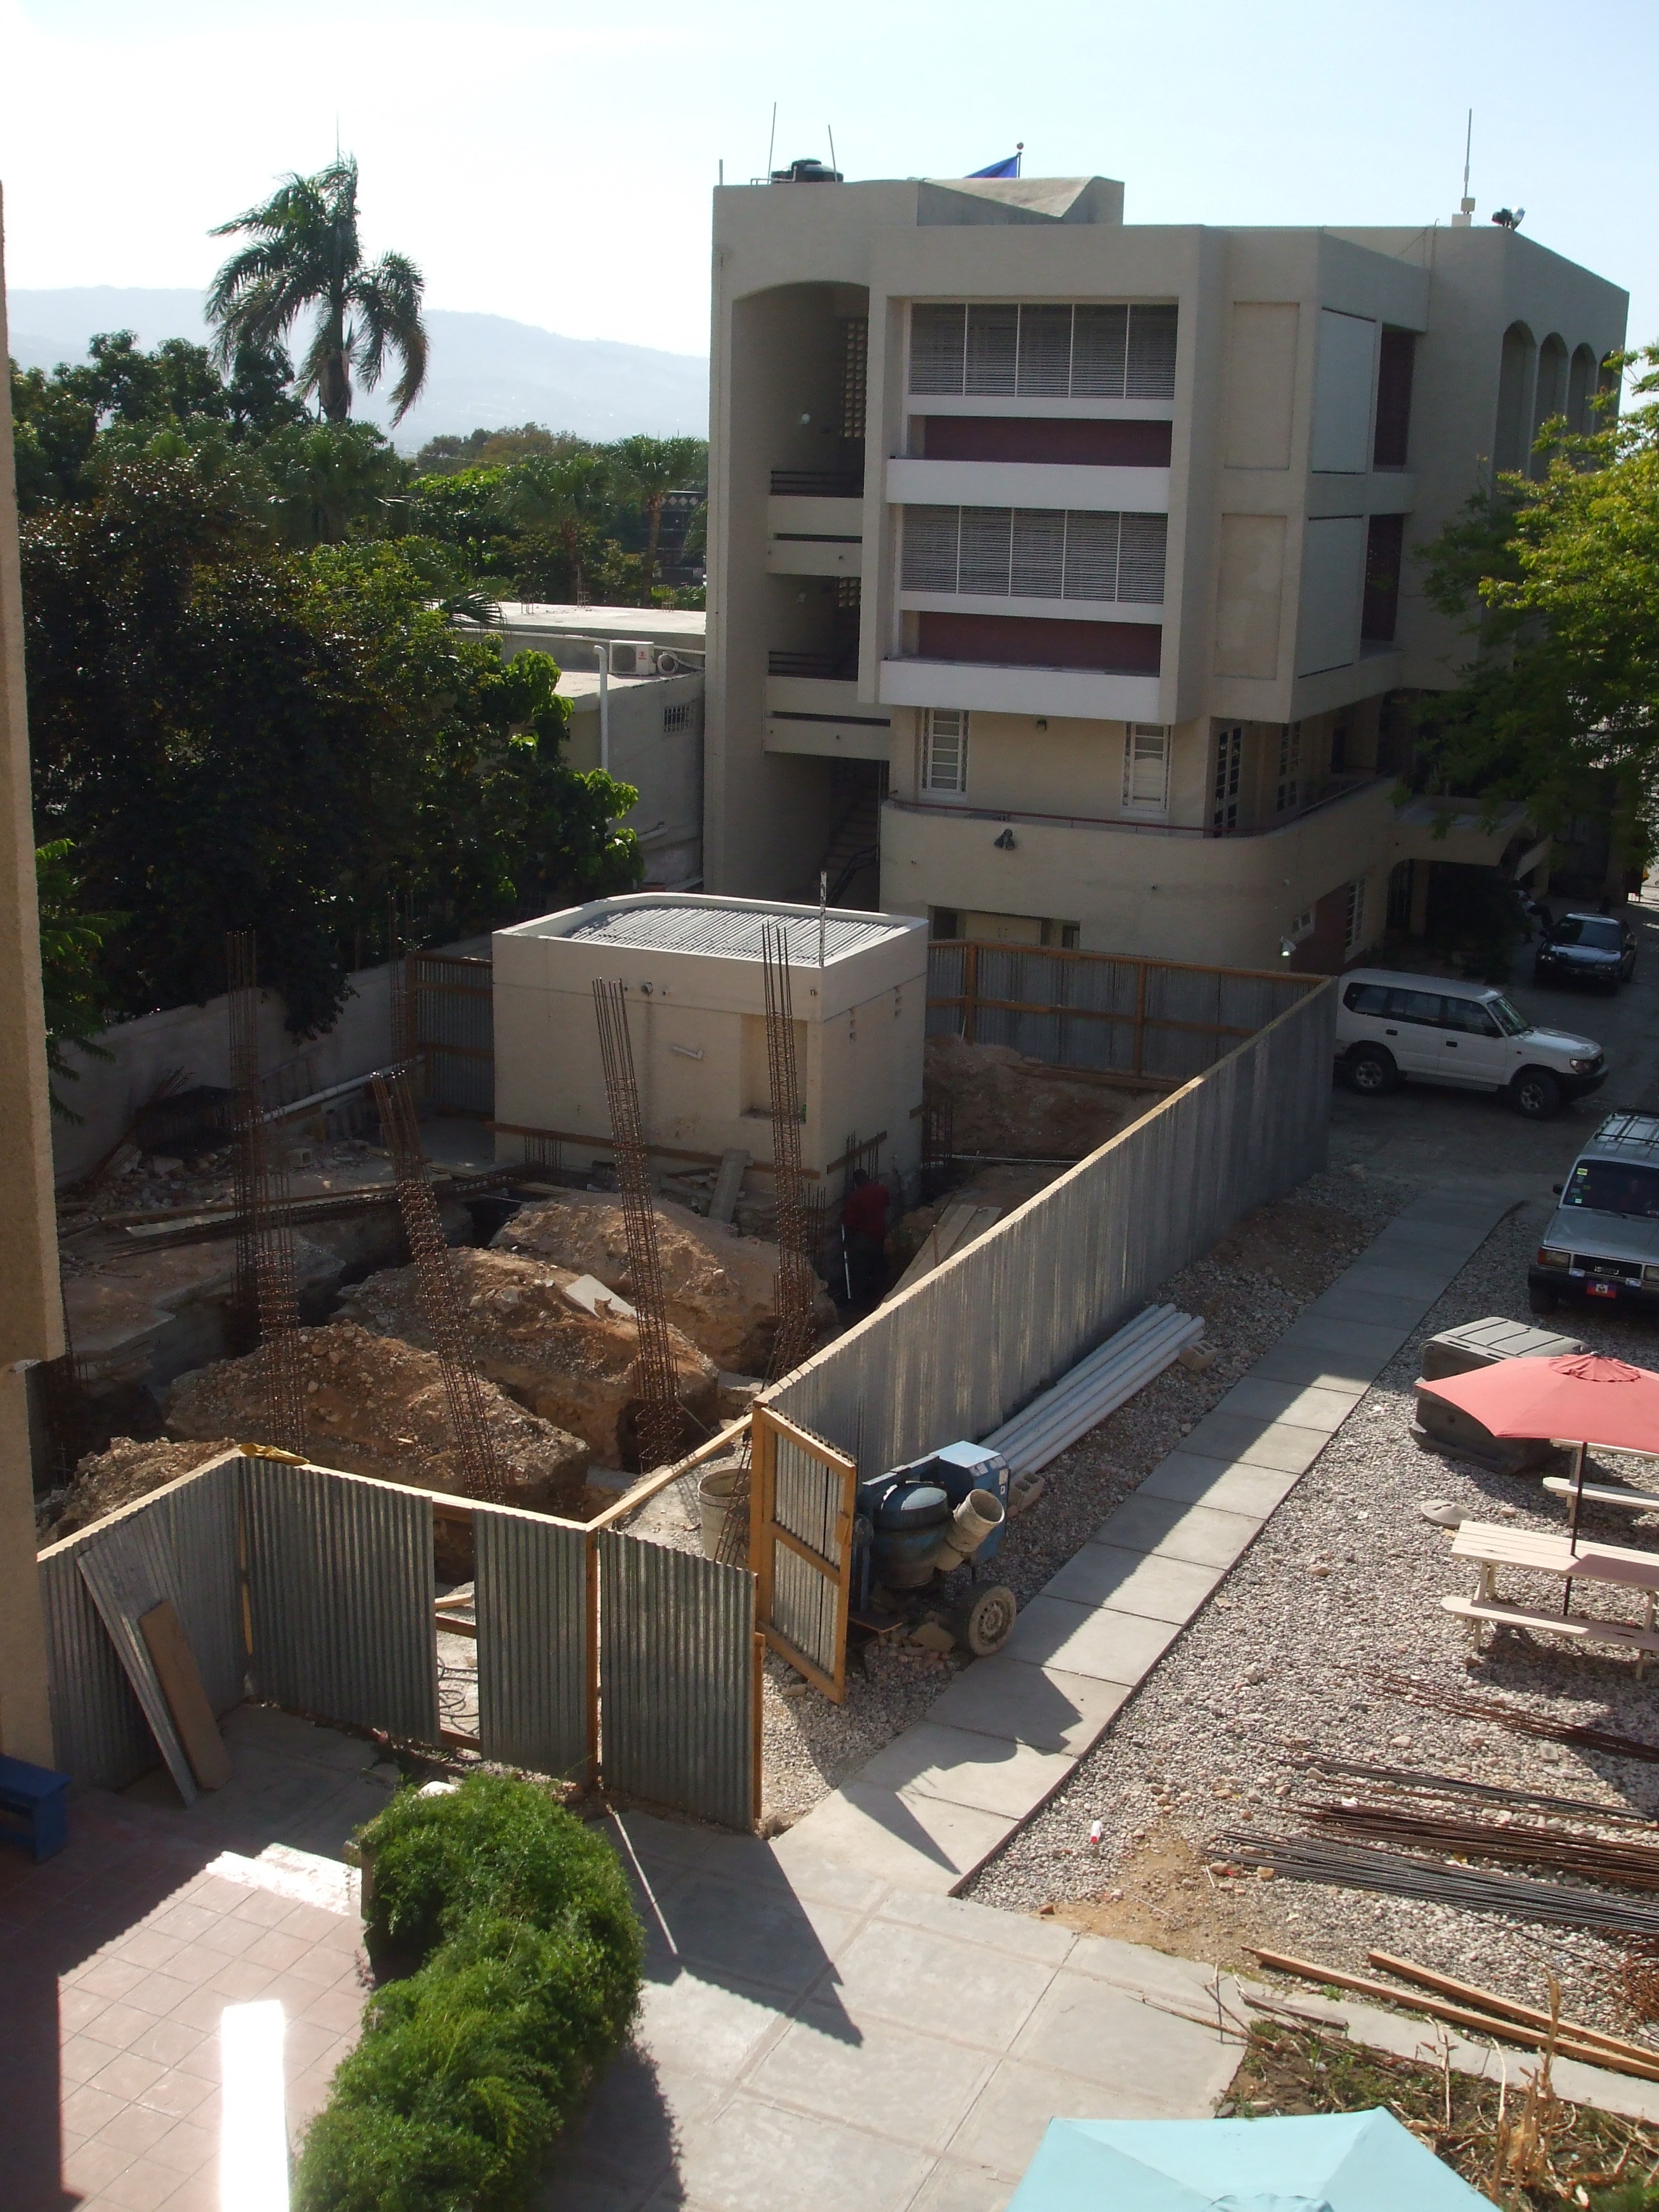 Construction of a new Haitian American Institute library is underway in Port-au-Prince.